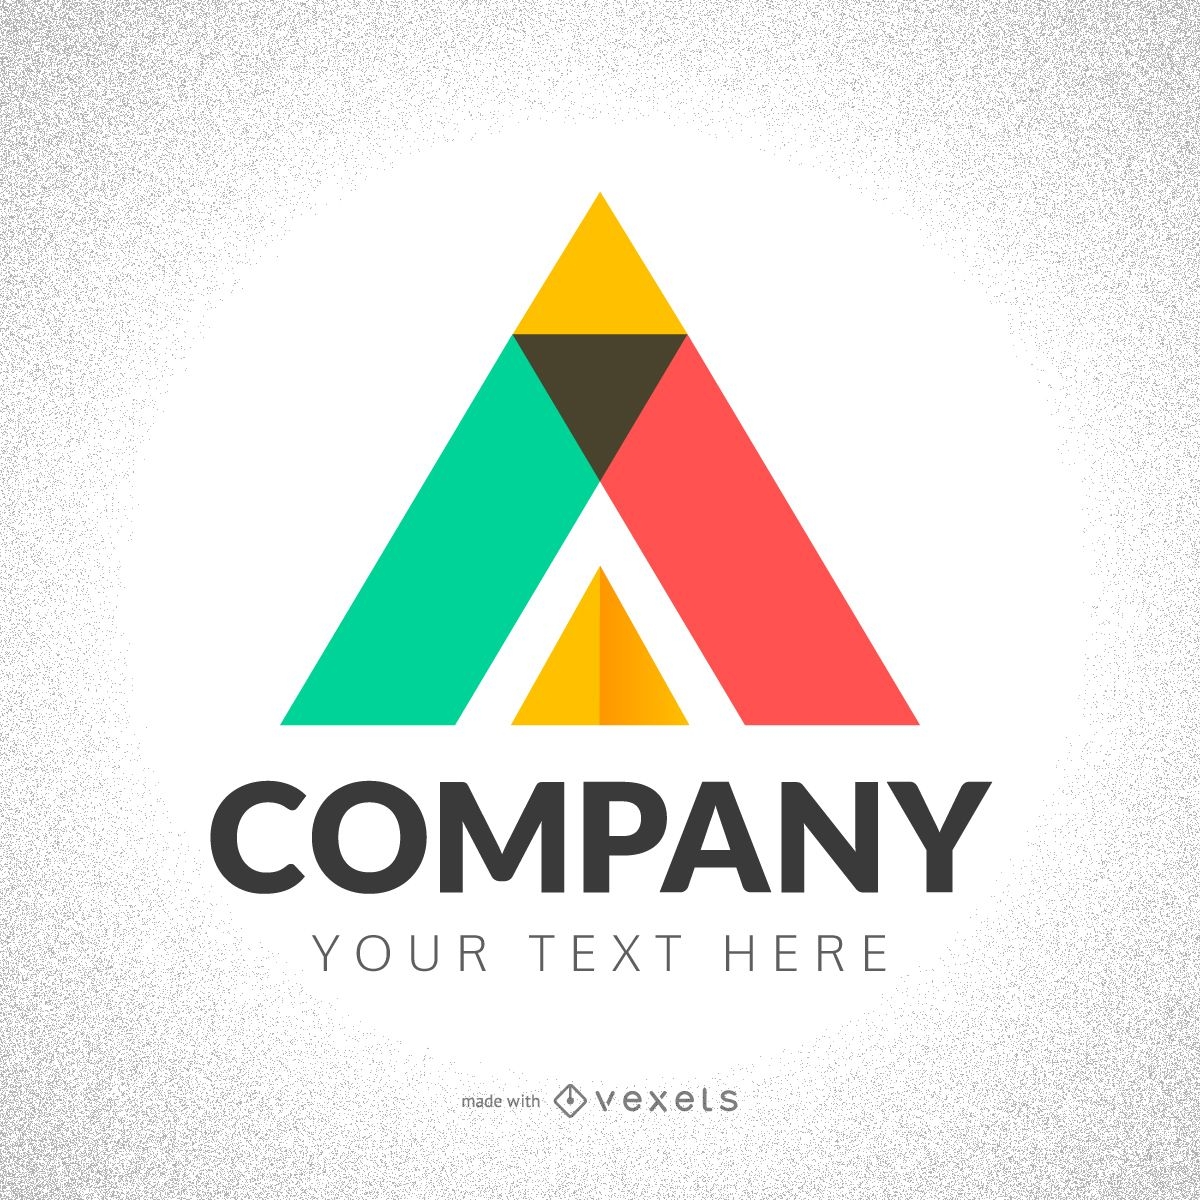 Abstract triangle logo maker